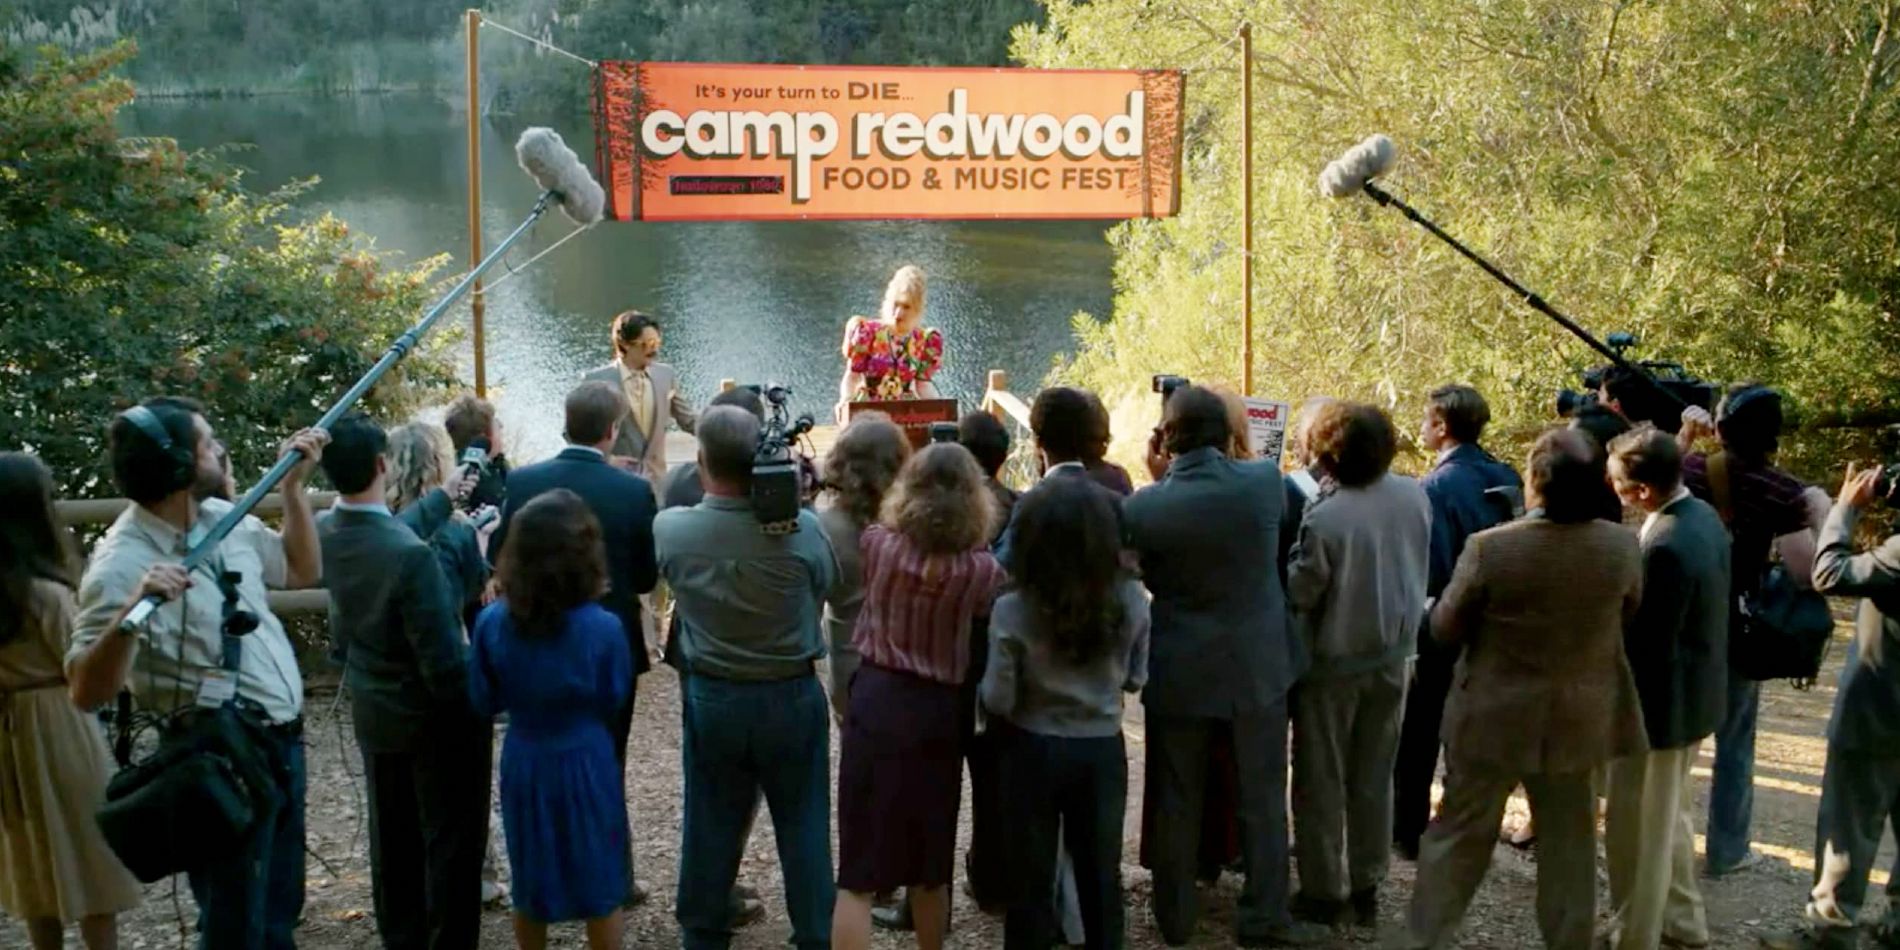 American Horror Story 1984 Camp Redwood location